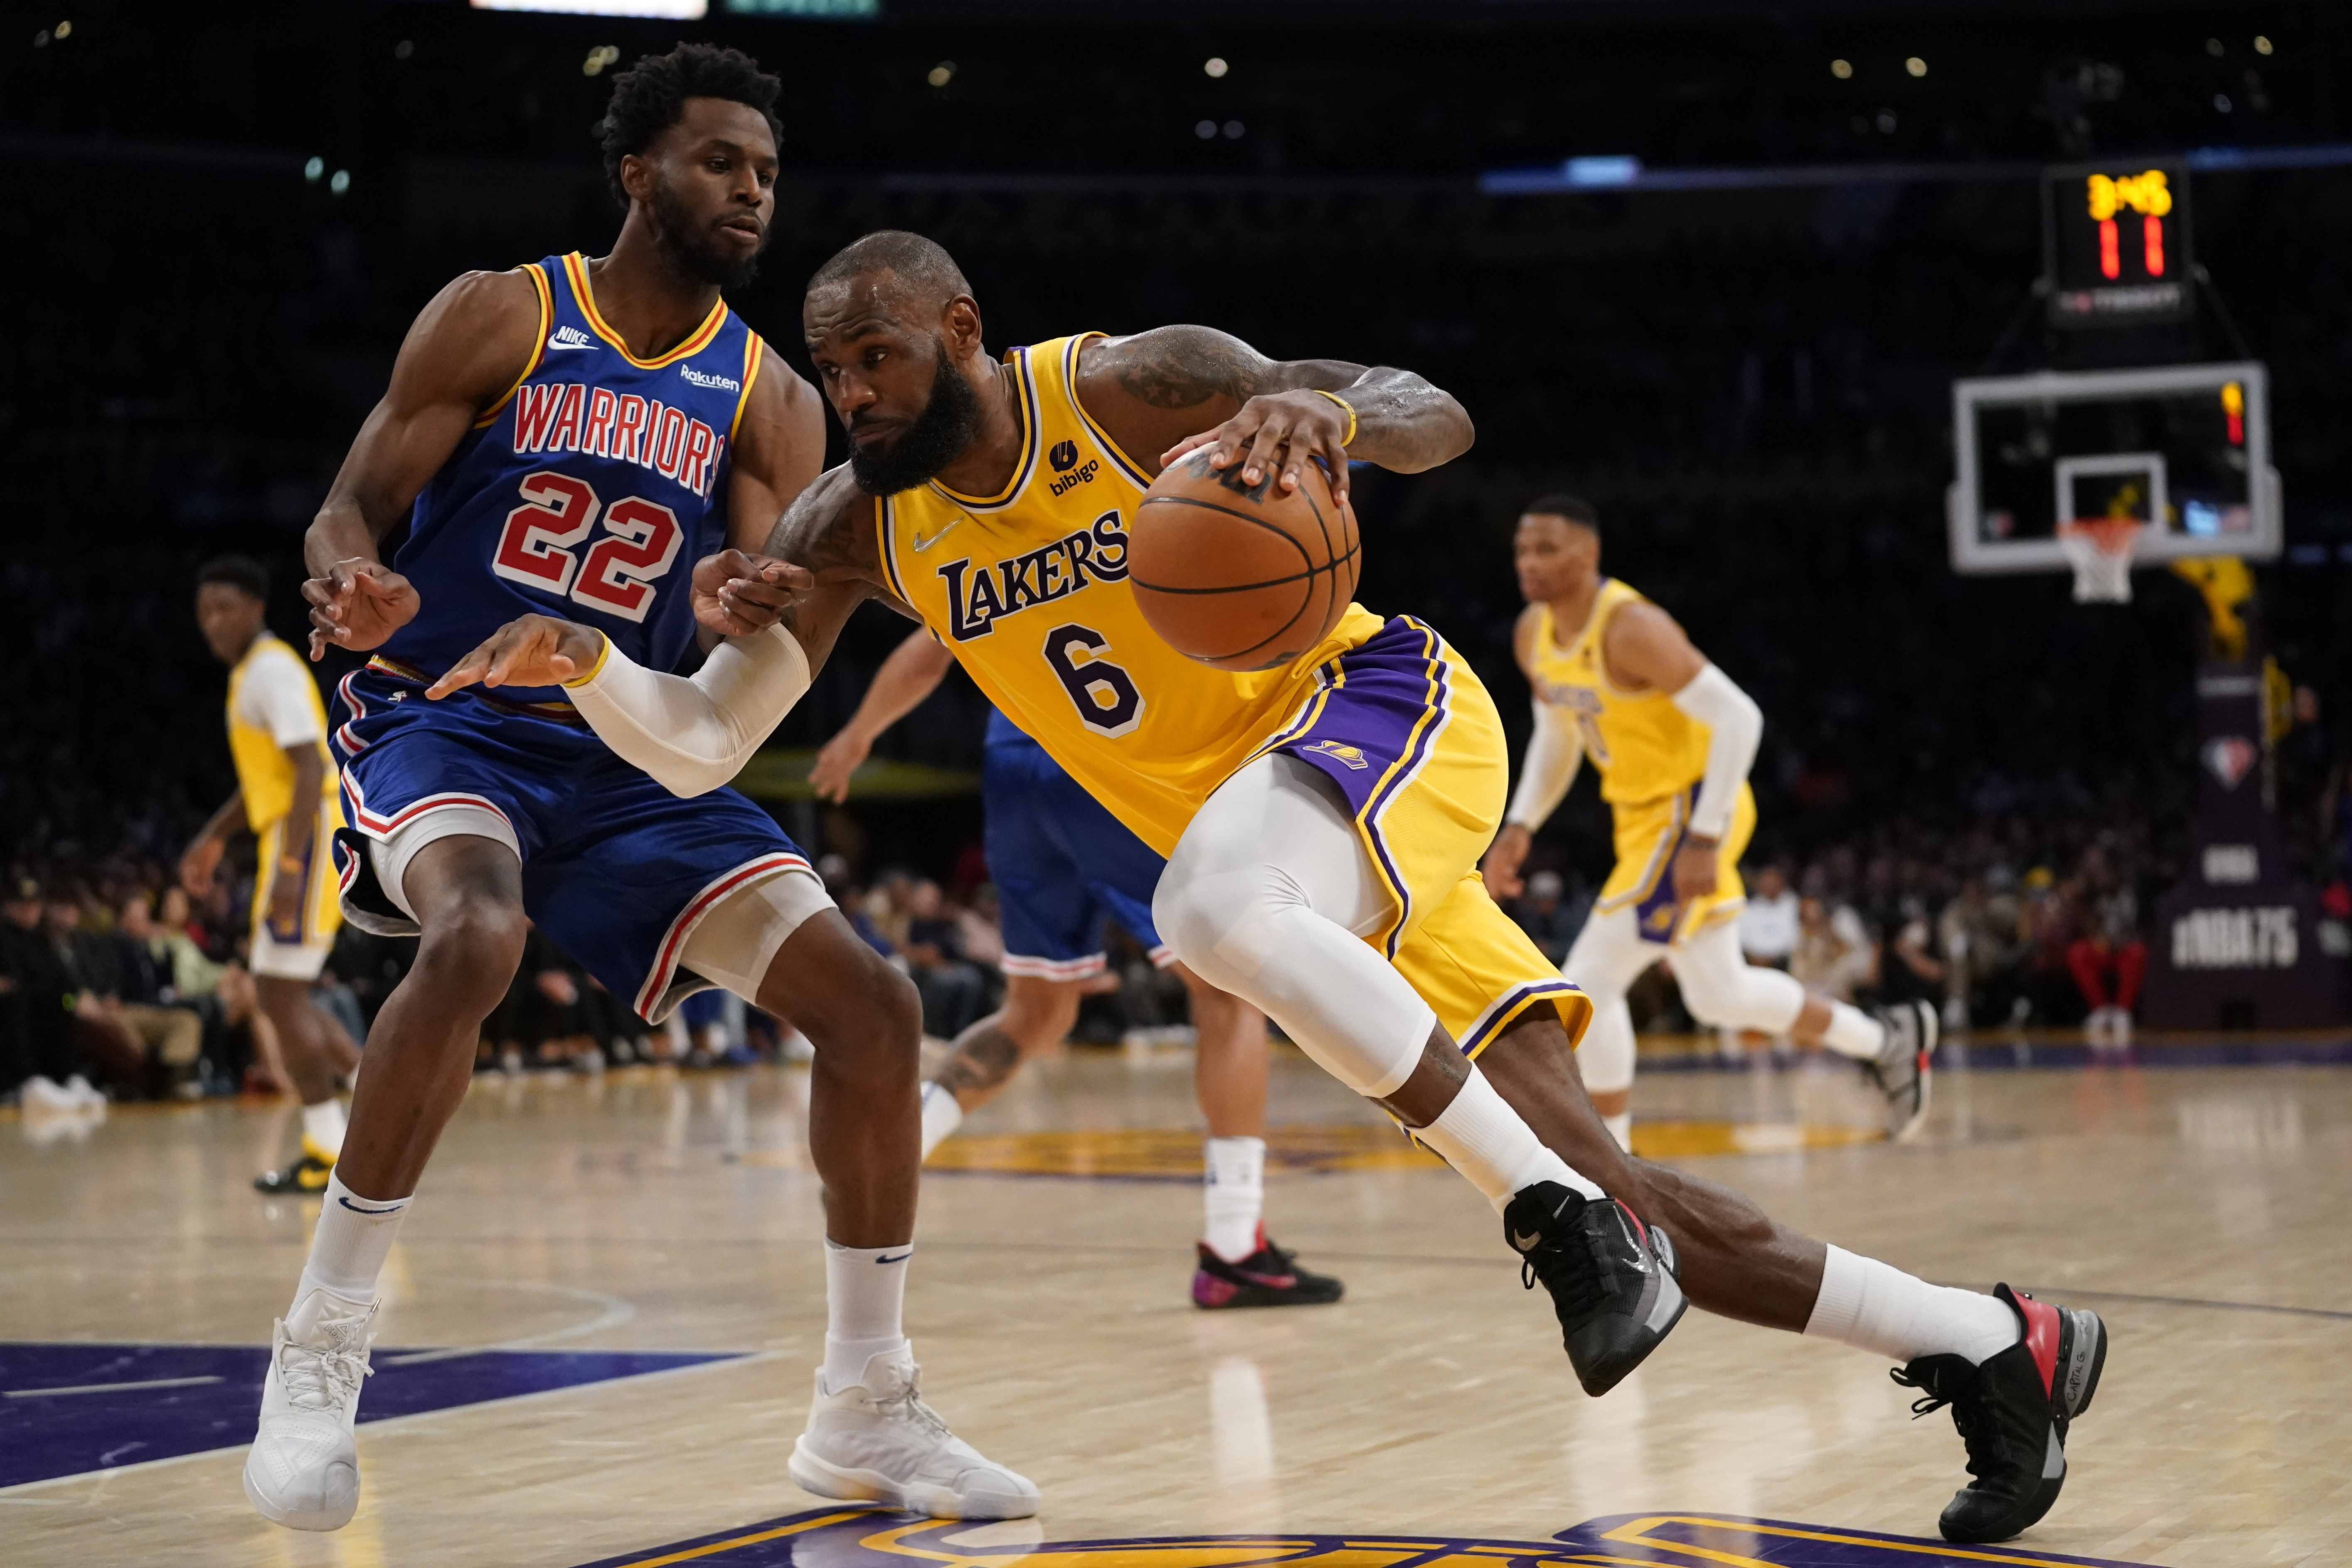 James scores 56 points, Lakers Warriors to end skid